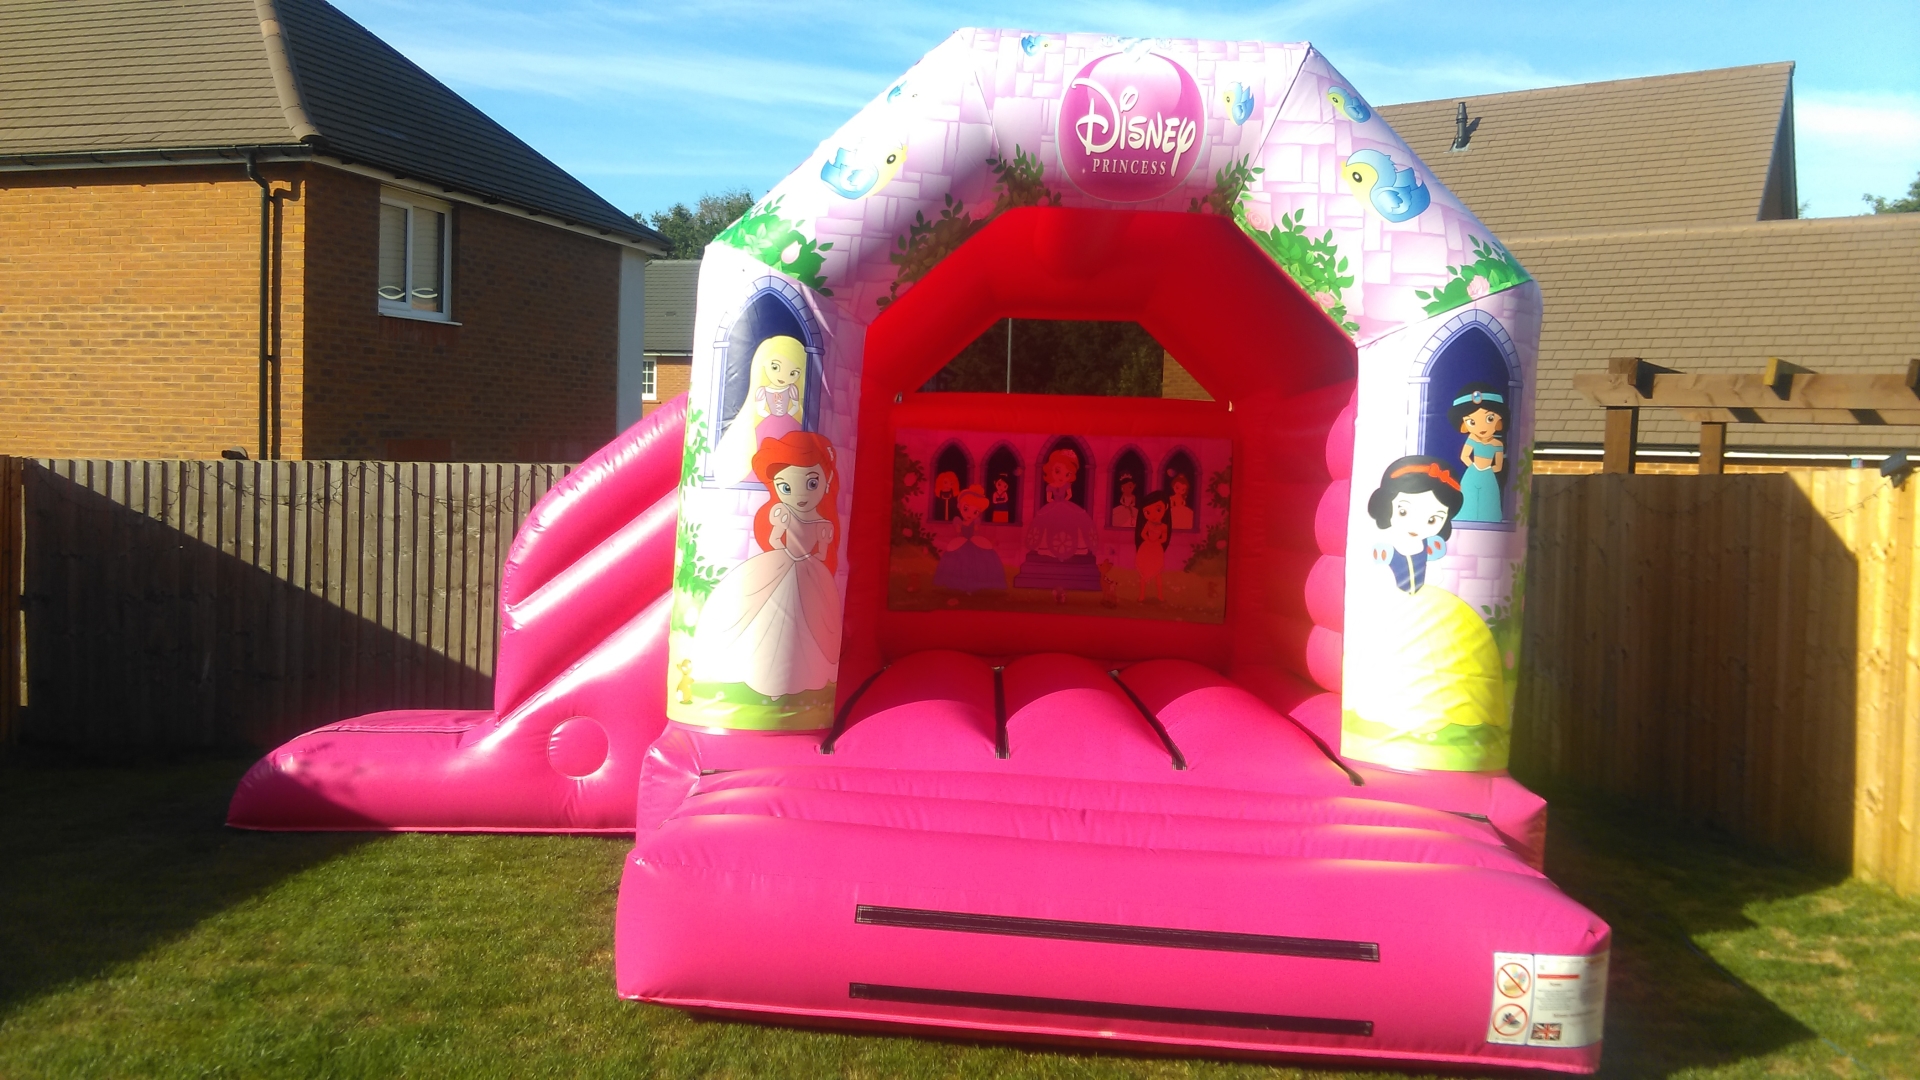 New Princess Bouncy Castle With Slide